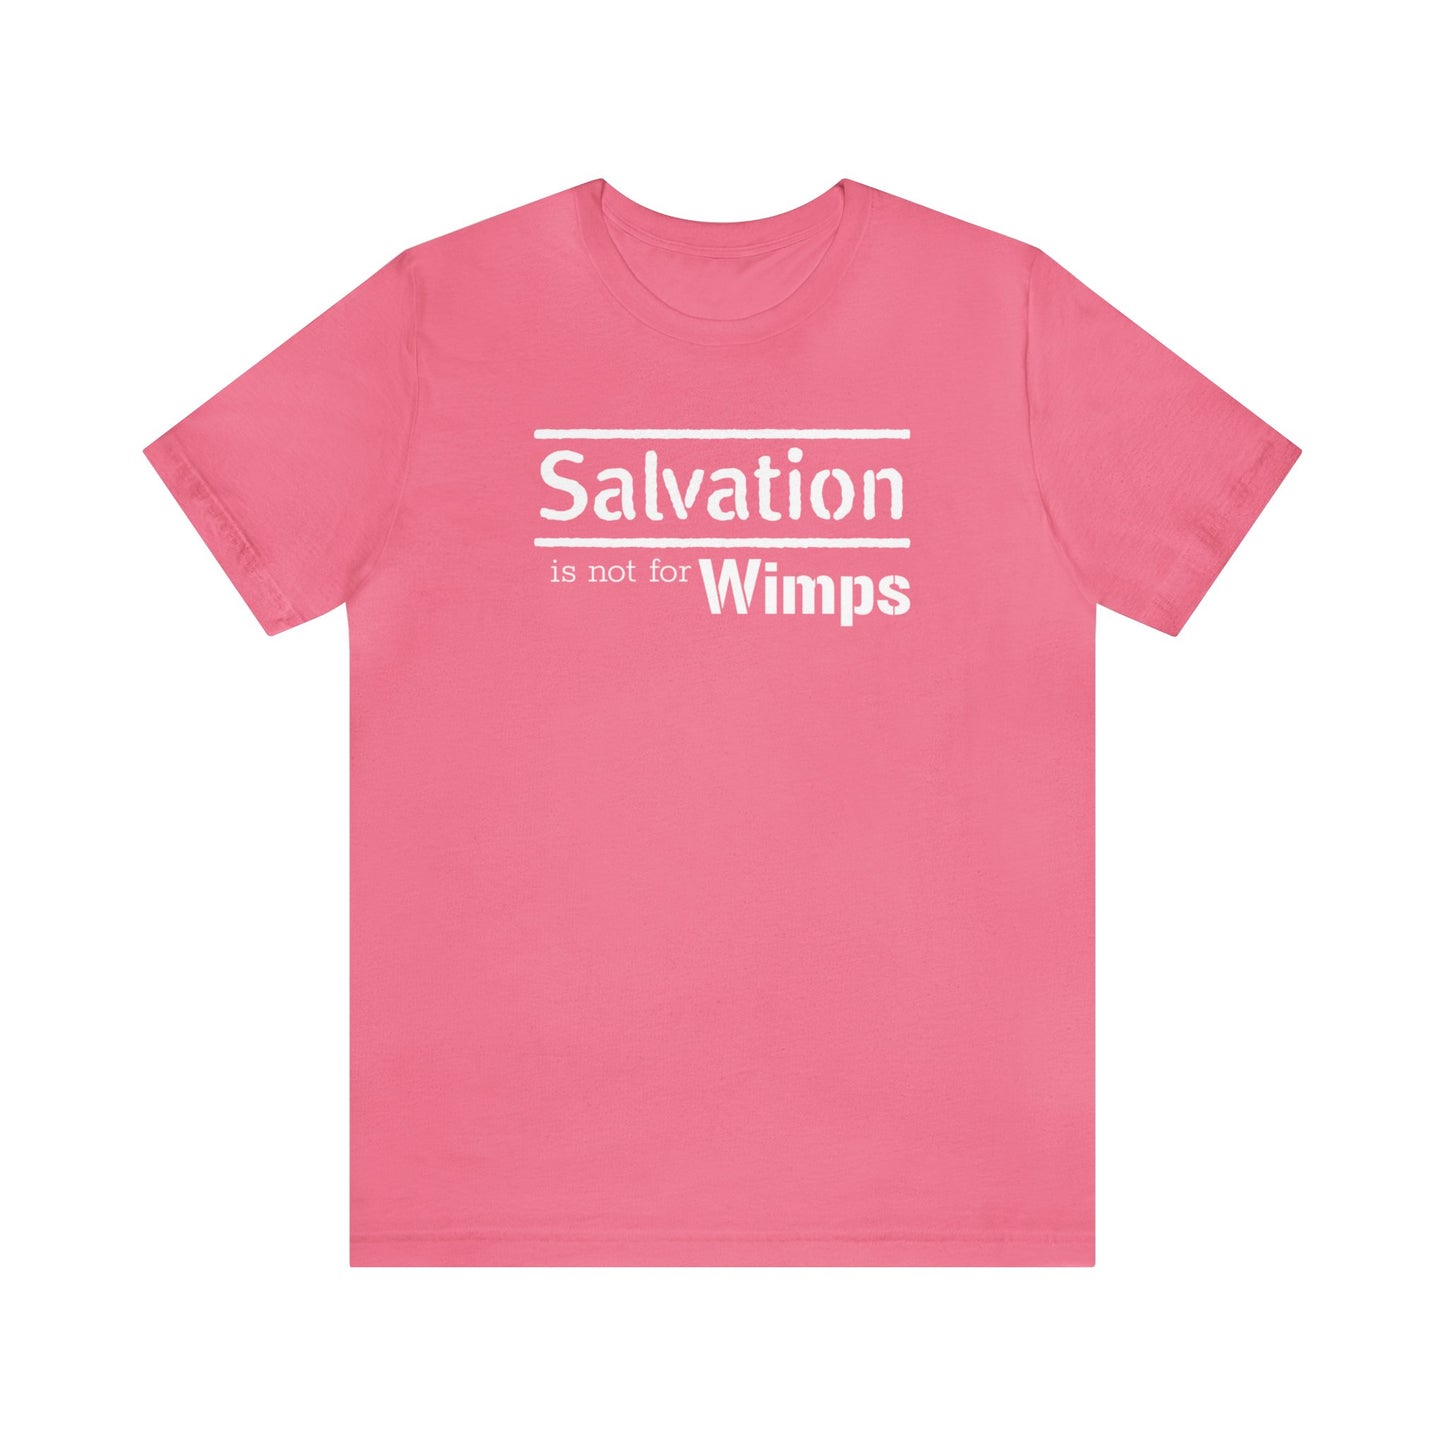 Salvation is Not for Wimps, Unisex Jersery Tee - The Bible Junkies®